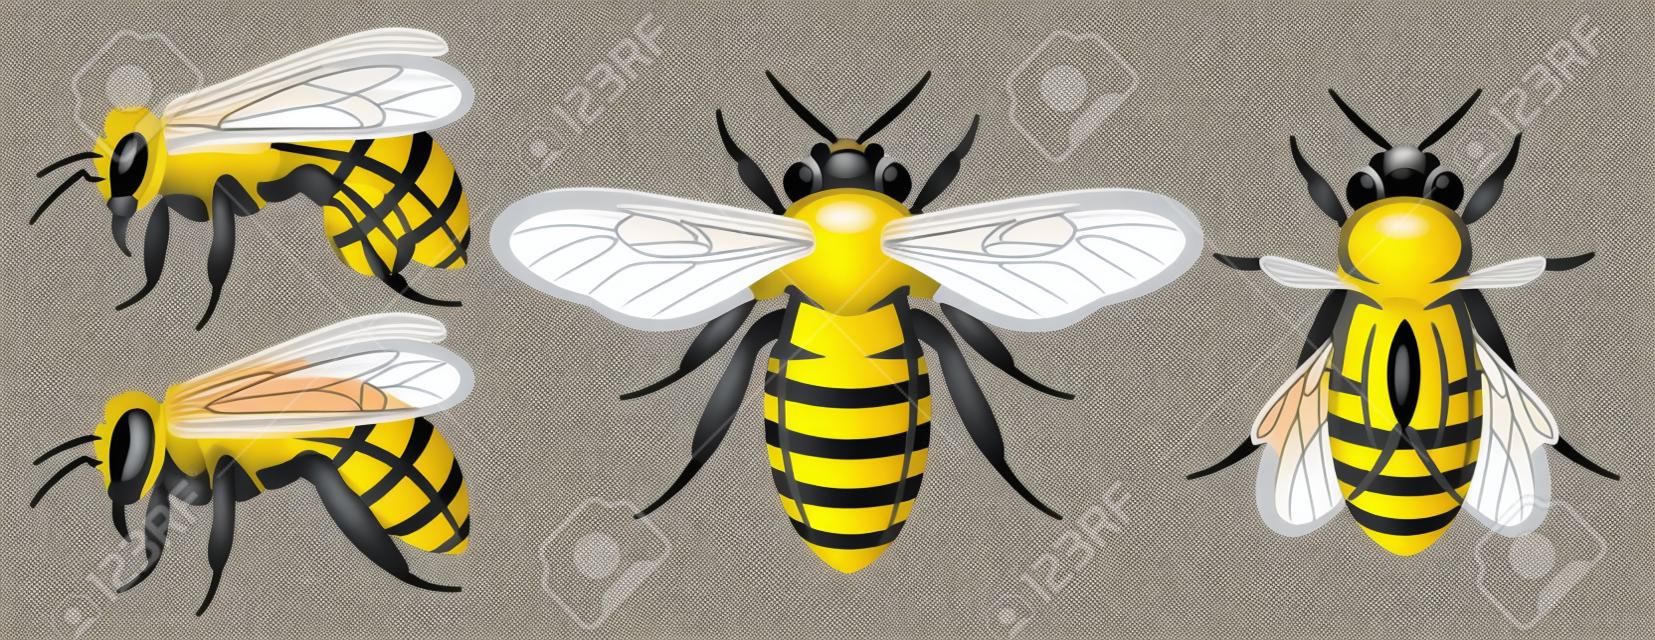 Set of different bees. Design elements. Colored vector illustration.